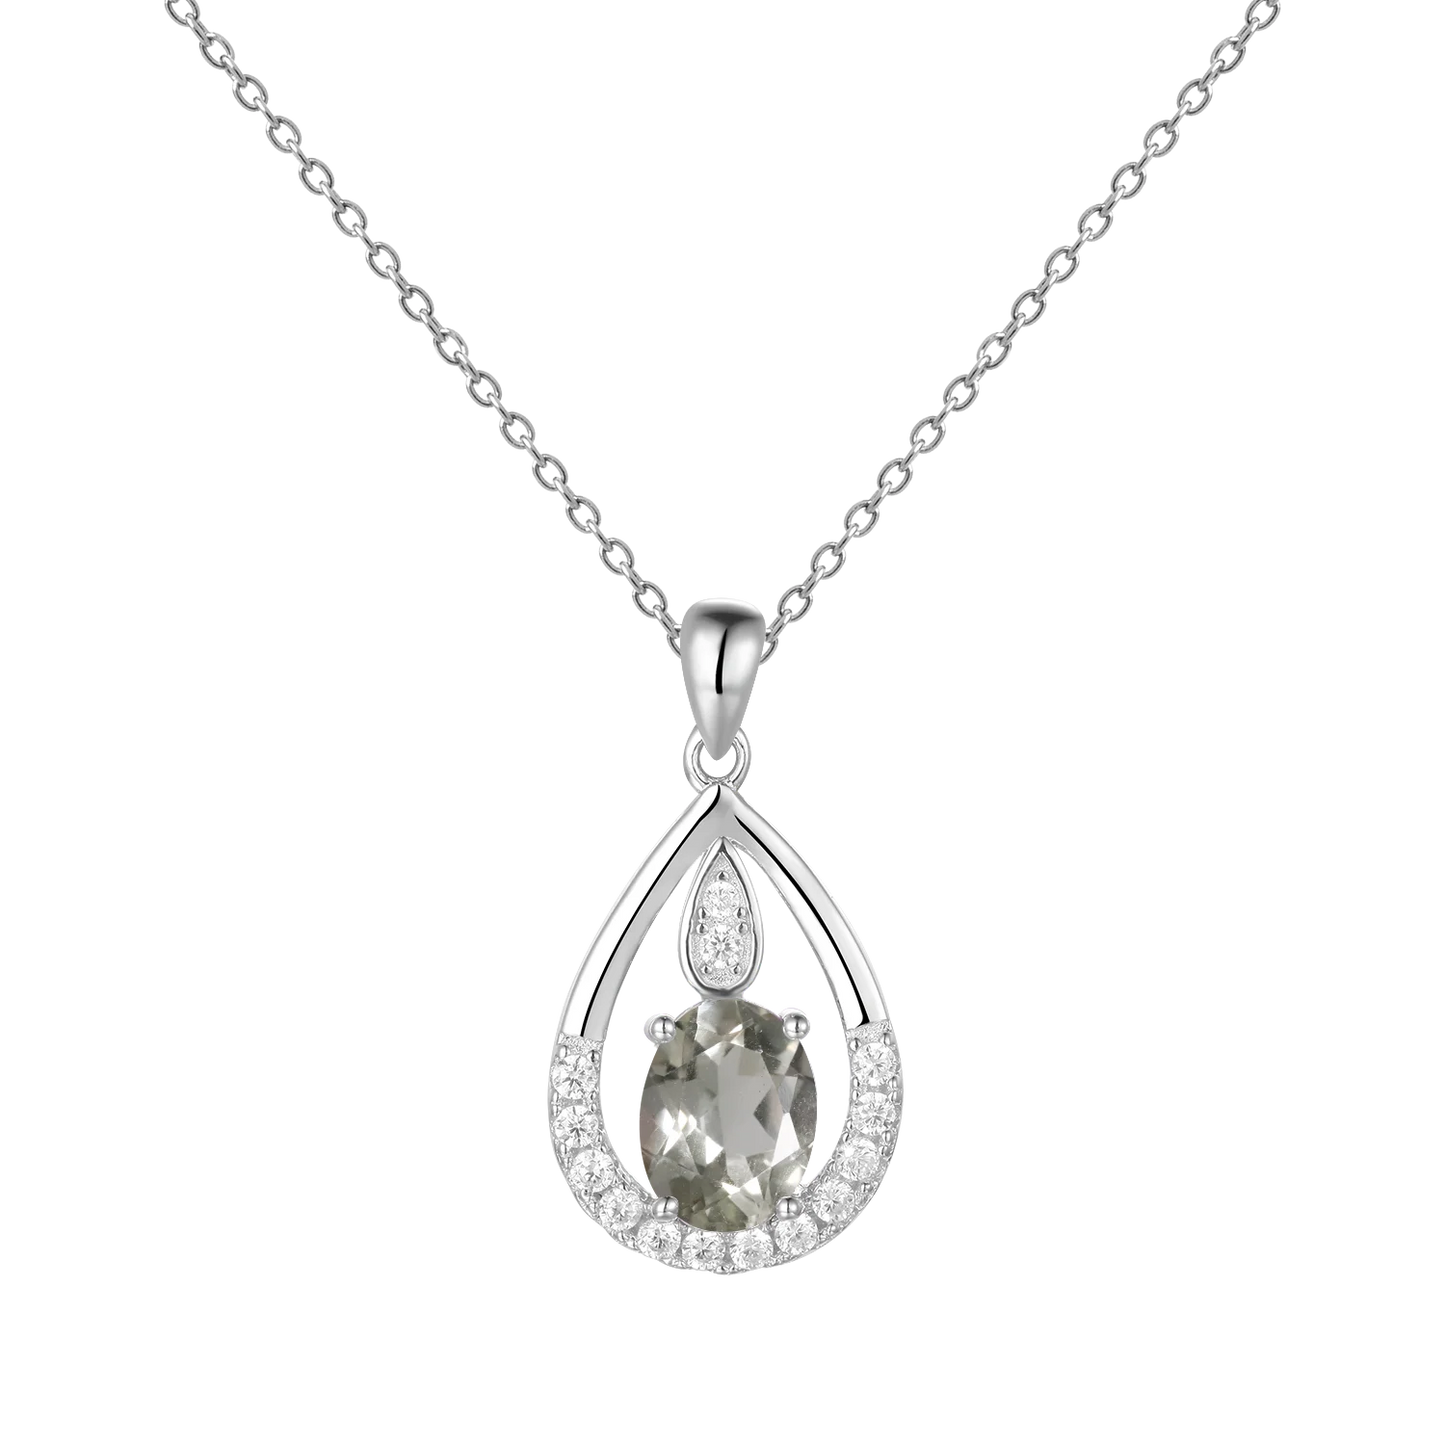 Gem's Ballet December Birthstone Topaz Necklace 6x8mm Oval Pink Topaz Pendant Necklace in 925 Sterling Silver with 18" Chain Green Amethyst